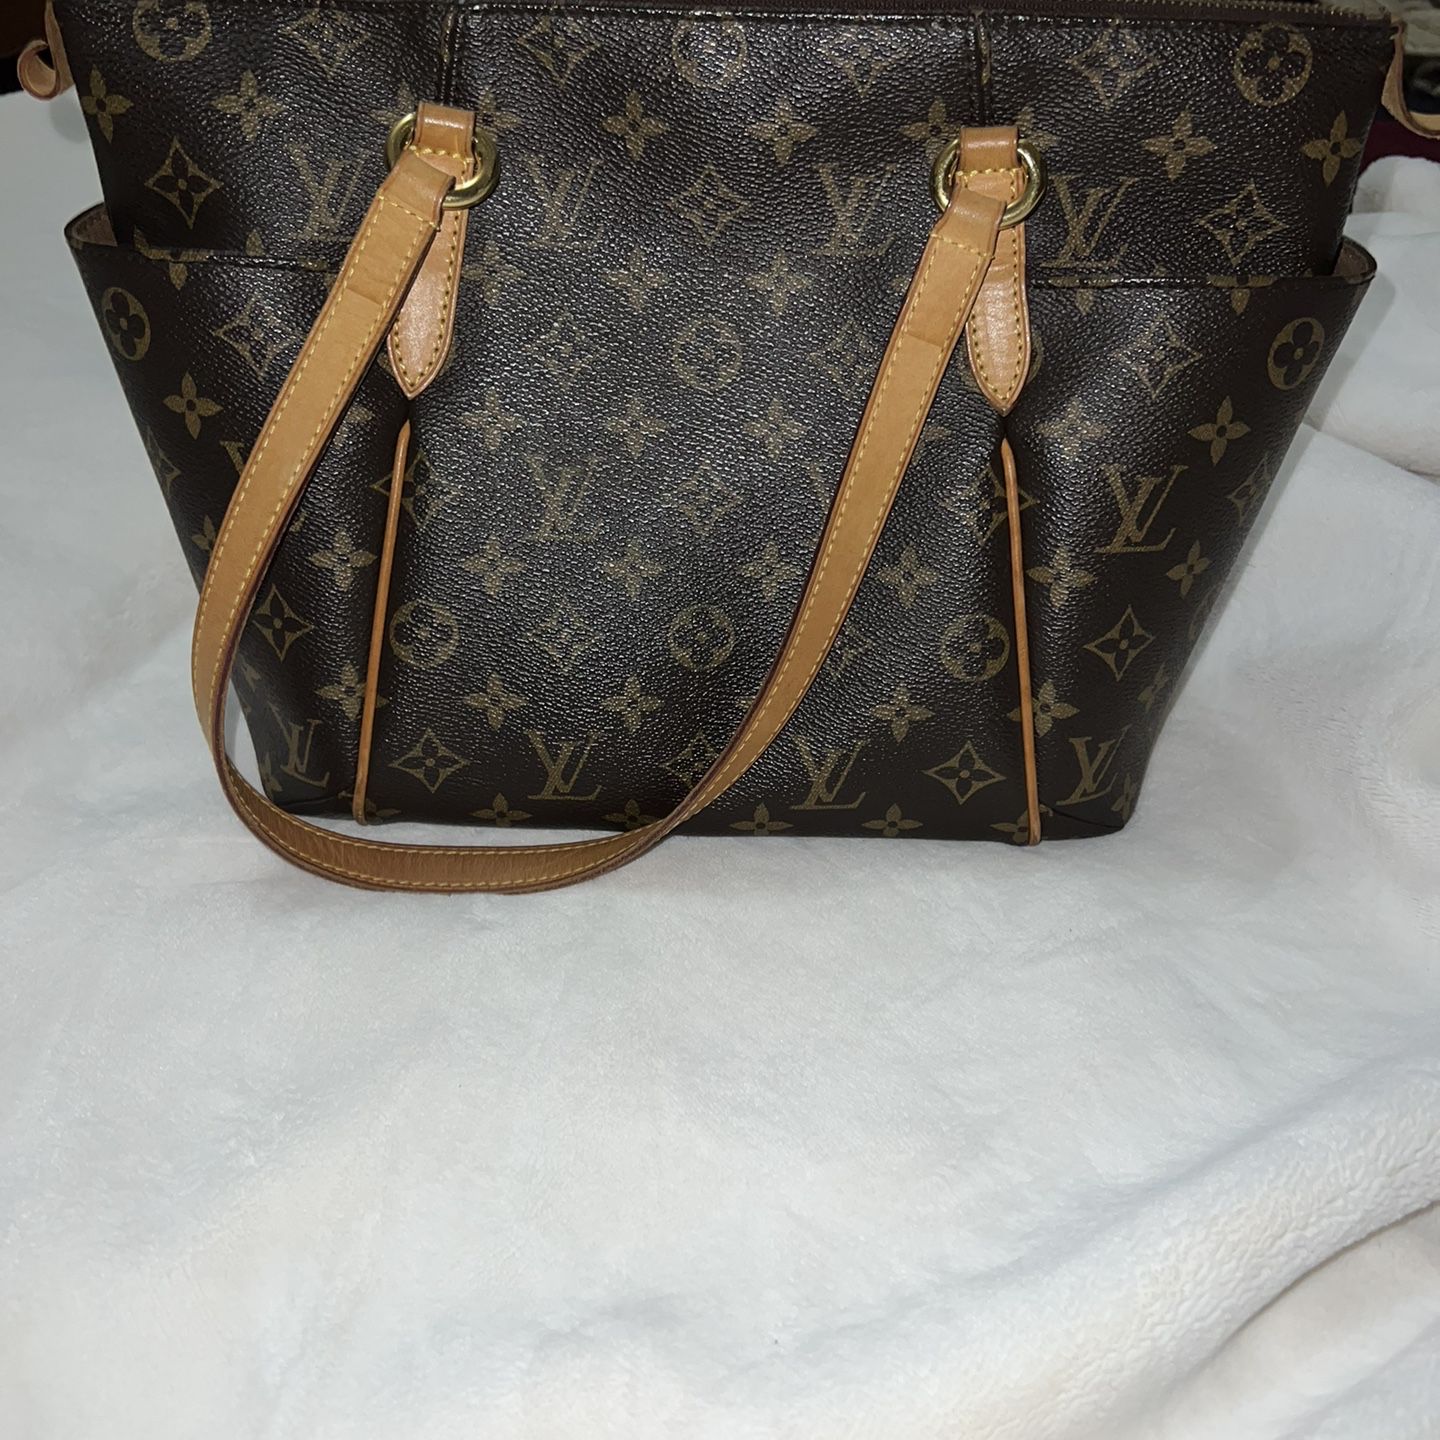 LV Original Nvr Full Canvas Purse for Sale in Mission, TX - OfferUp